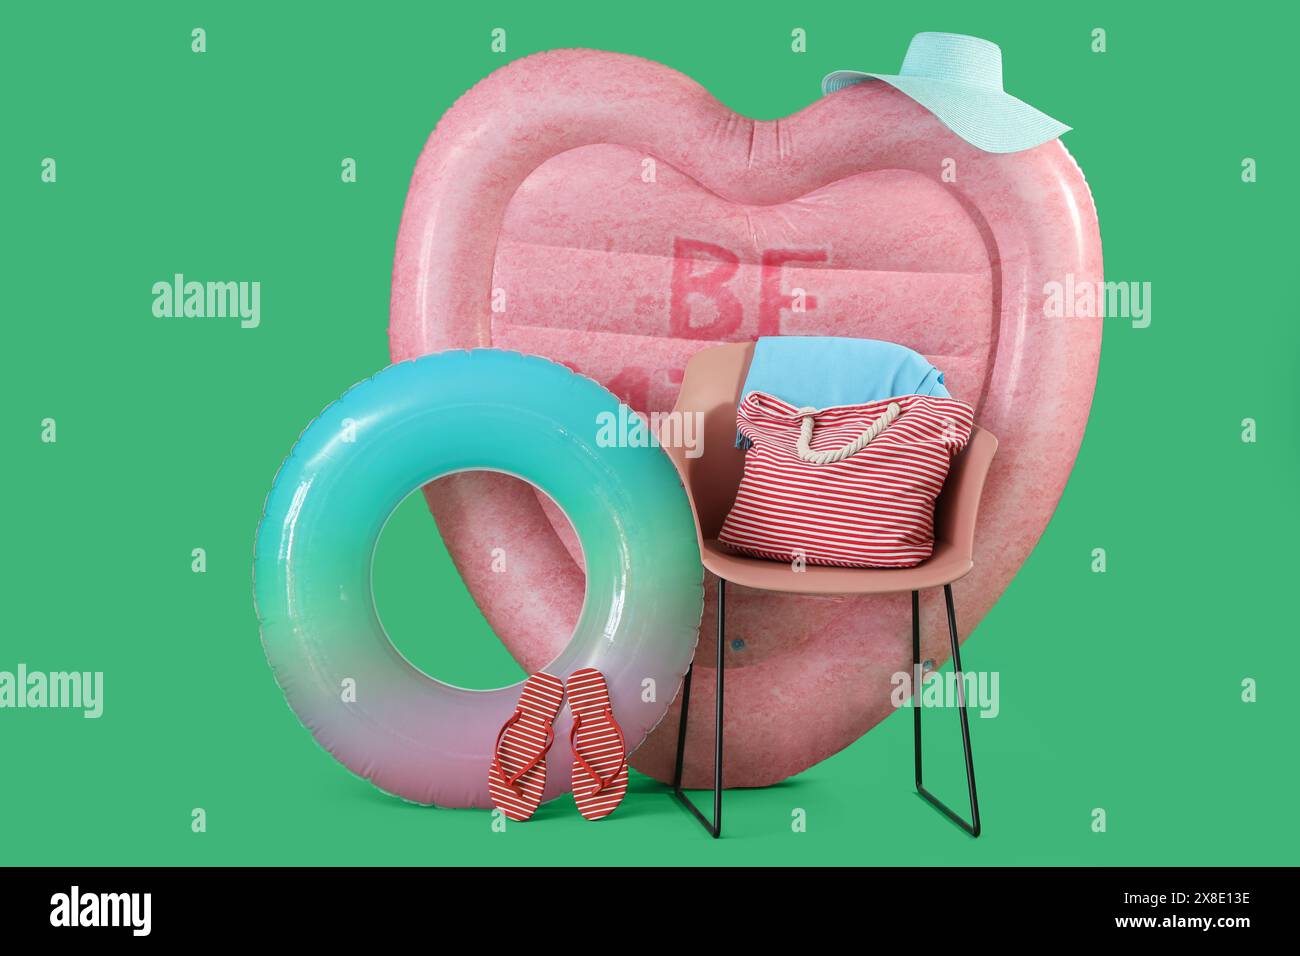 Swimming mattress in shape of heart, inflatable ring and chair with bag on green background Stock Photo